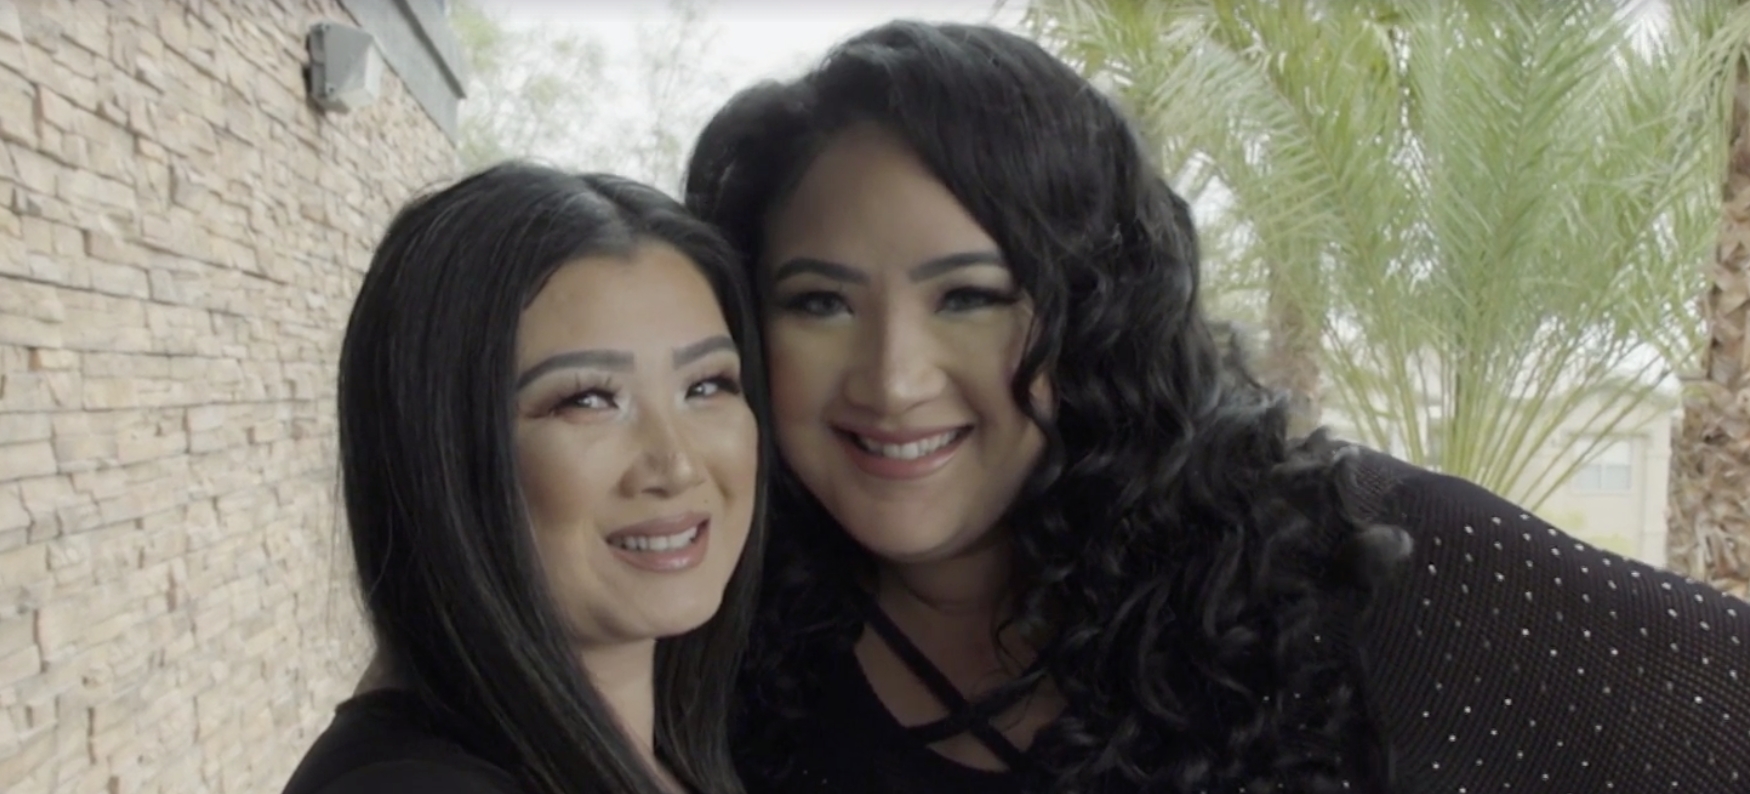 TLC's sMothered Introduces Some Very Close Mothers & Daughters